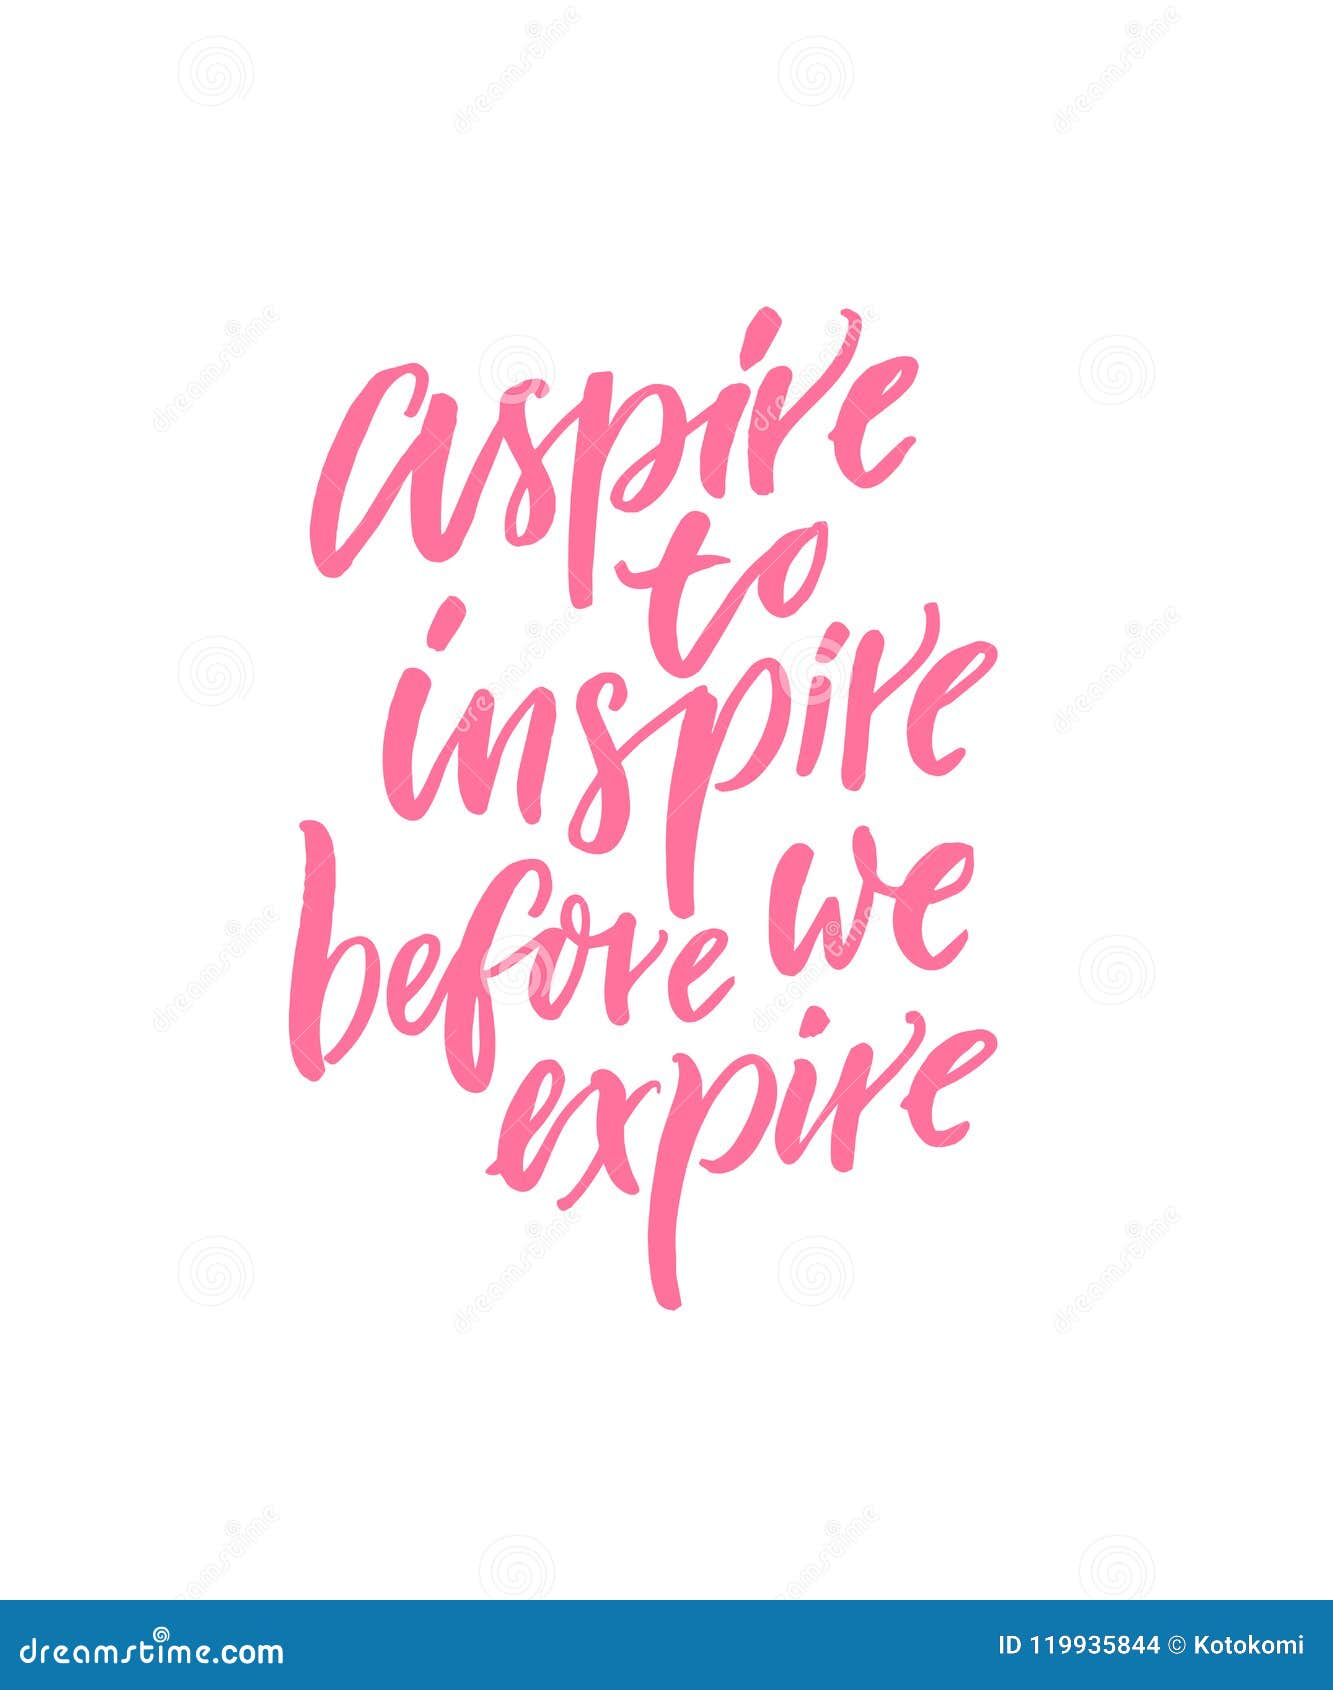 aspire to inspire before we expire. motivational and inspirational quote for posters, wall art, cards and apparel